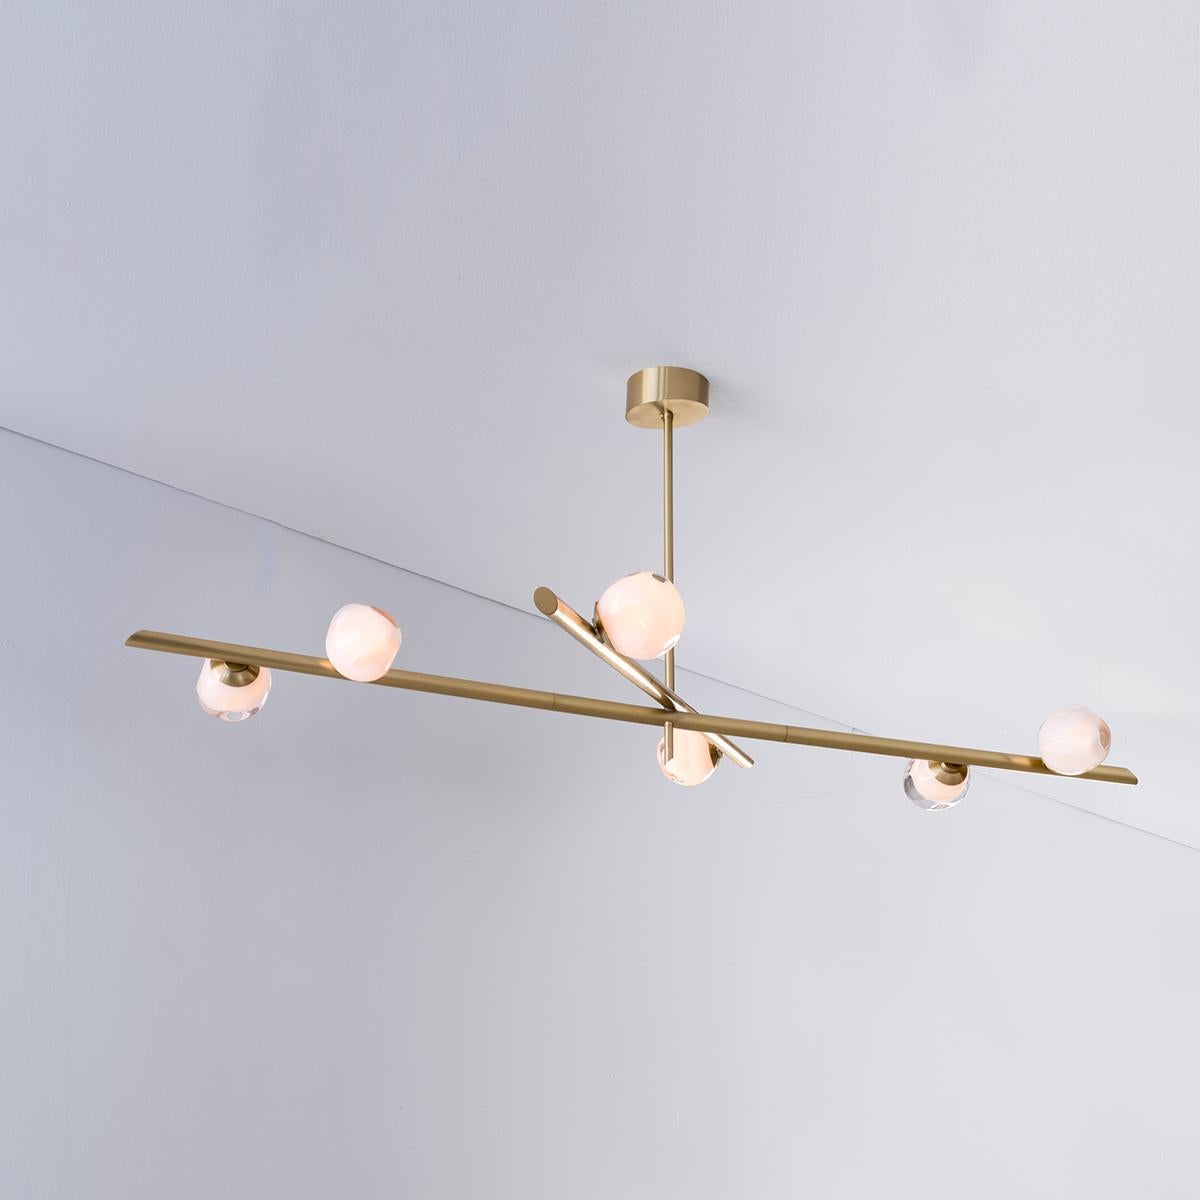 Italian Antares Ceiling Light by Gaspare Asaro-Satin Brass Finish For Sale